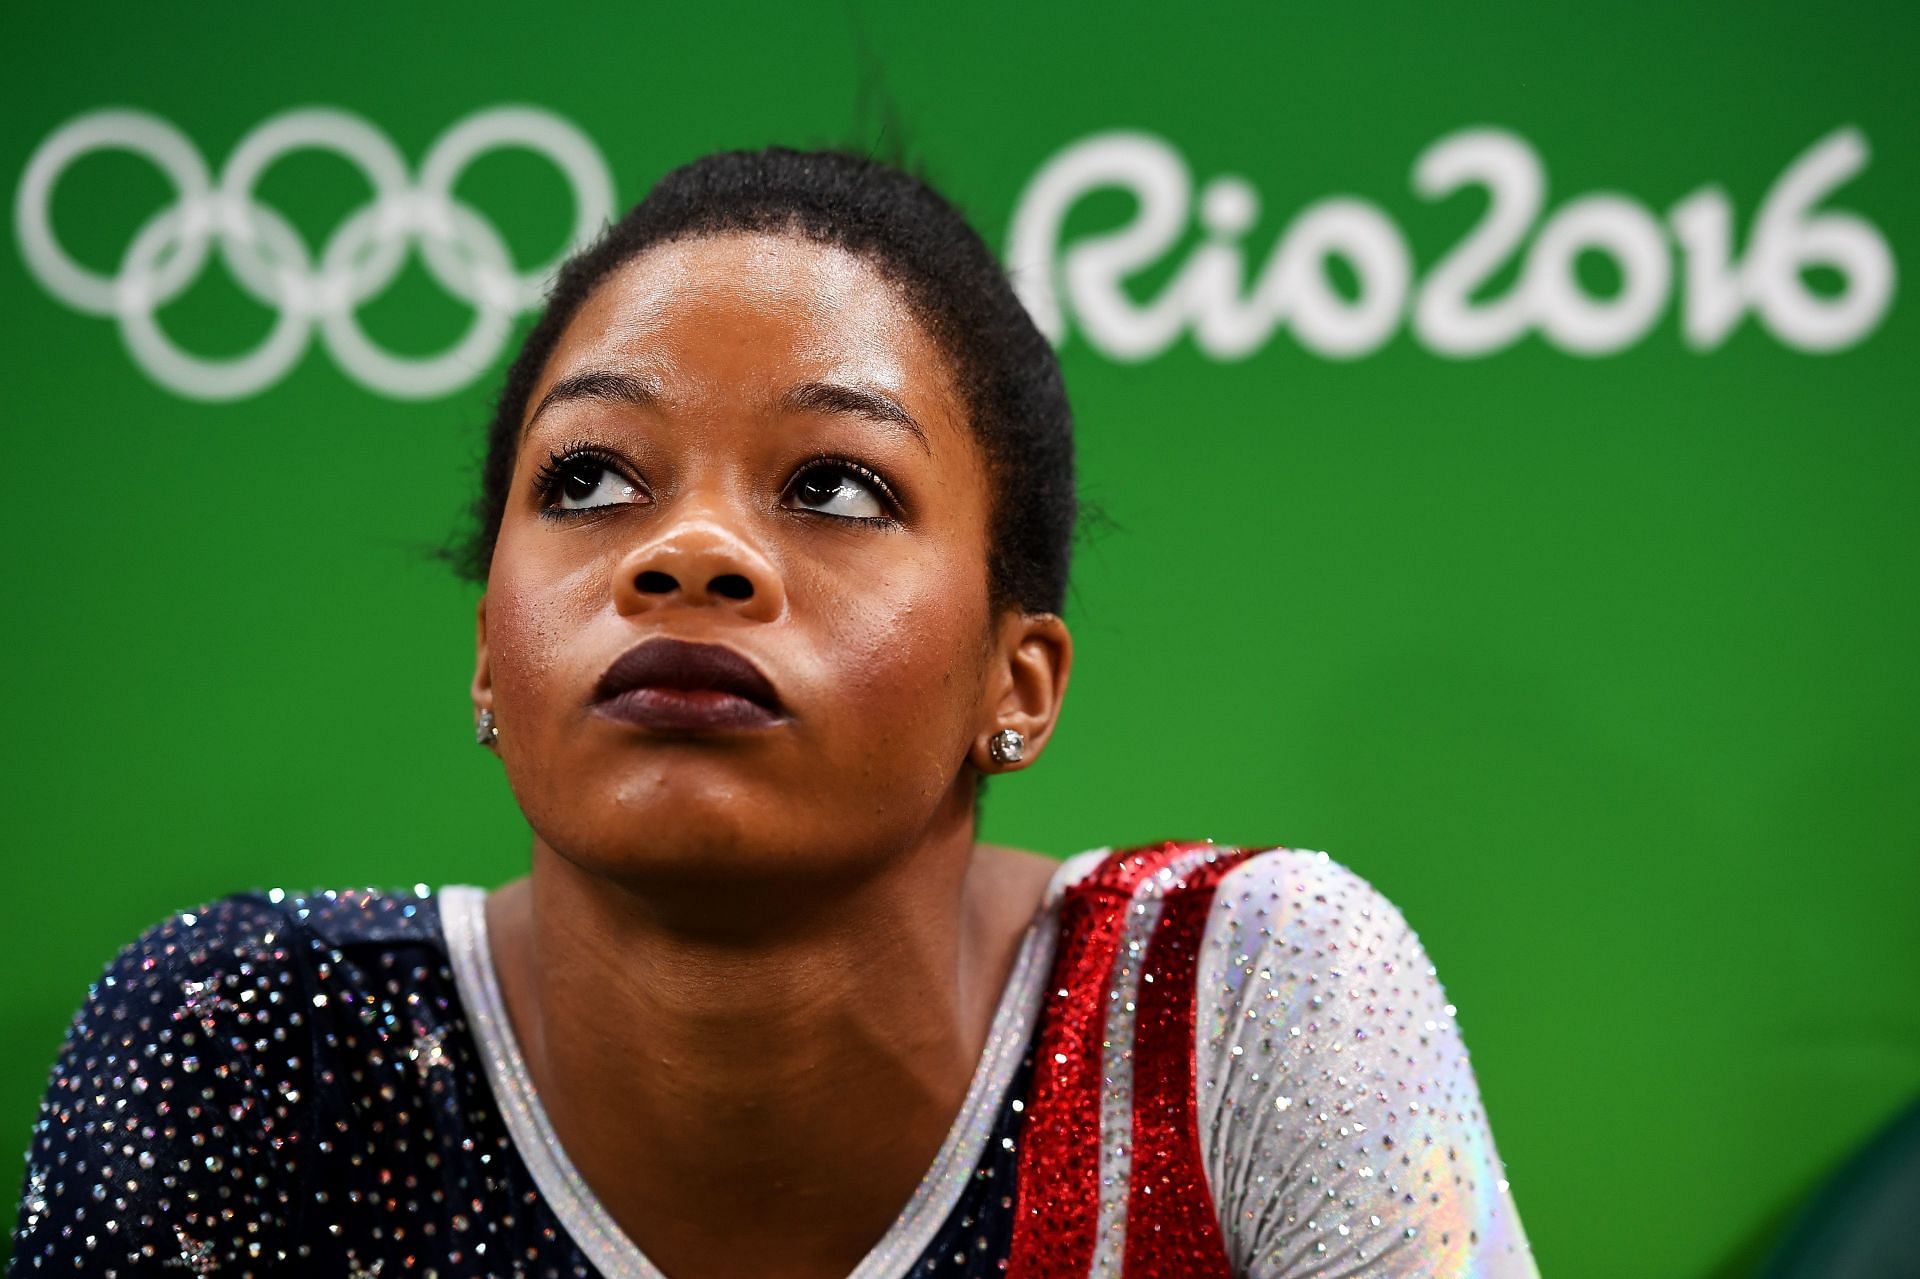 Gabby Douglas of the United States looks on during the Artistic Gymnastics Women&#039;s Team Final at the 2016 Olympic Games in Rio de Janeiro, Brazil.